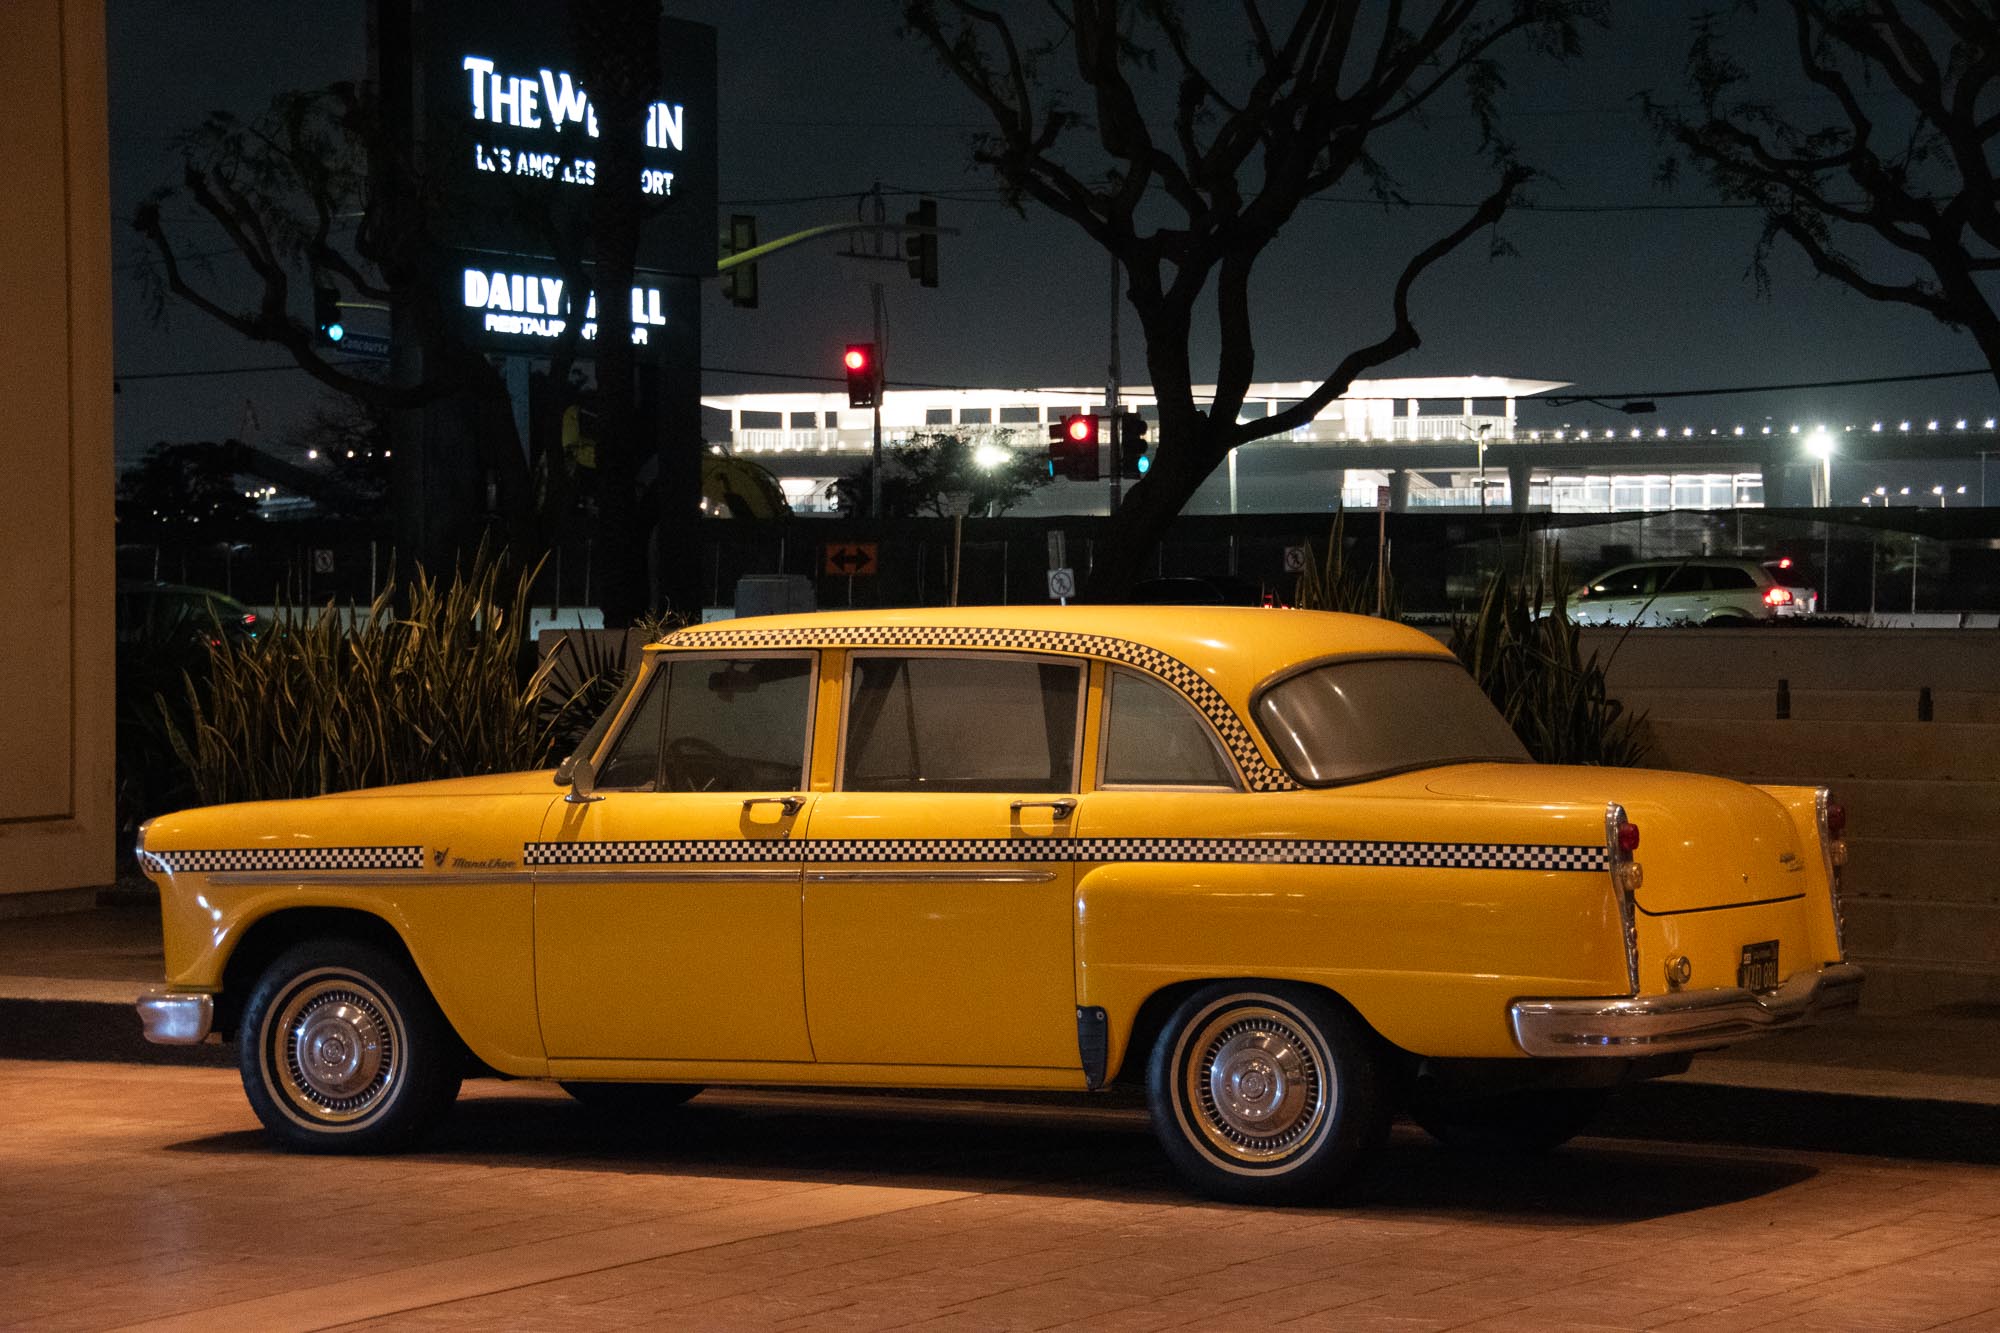 Our 1968 Checker Marathon TAXI was a bit dirty, but she’s still beautiful!